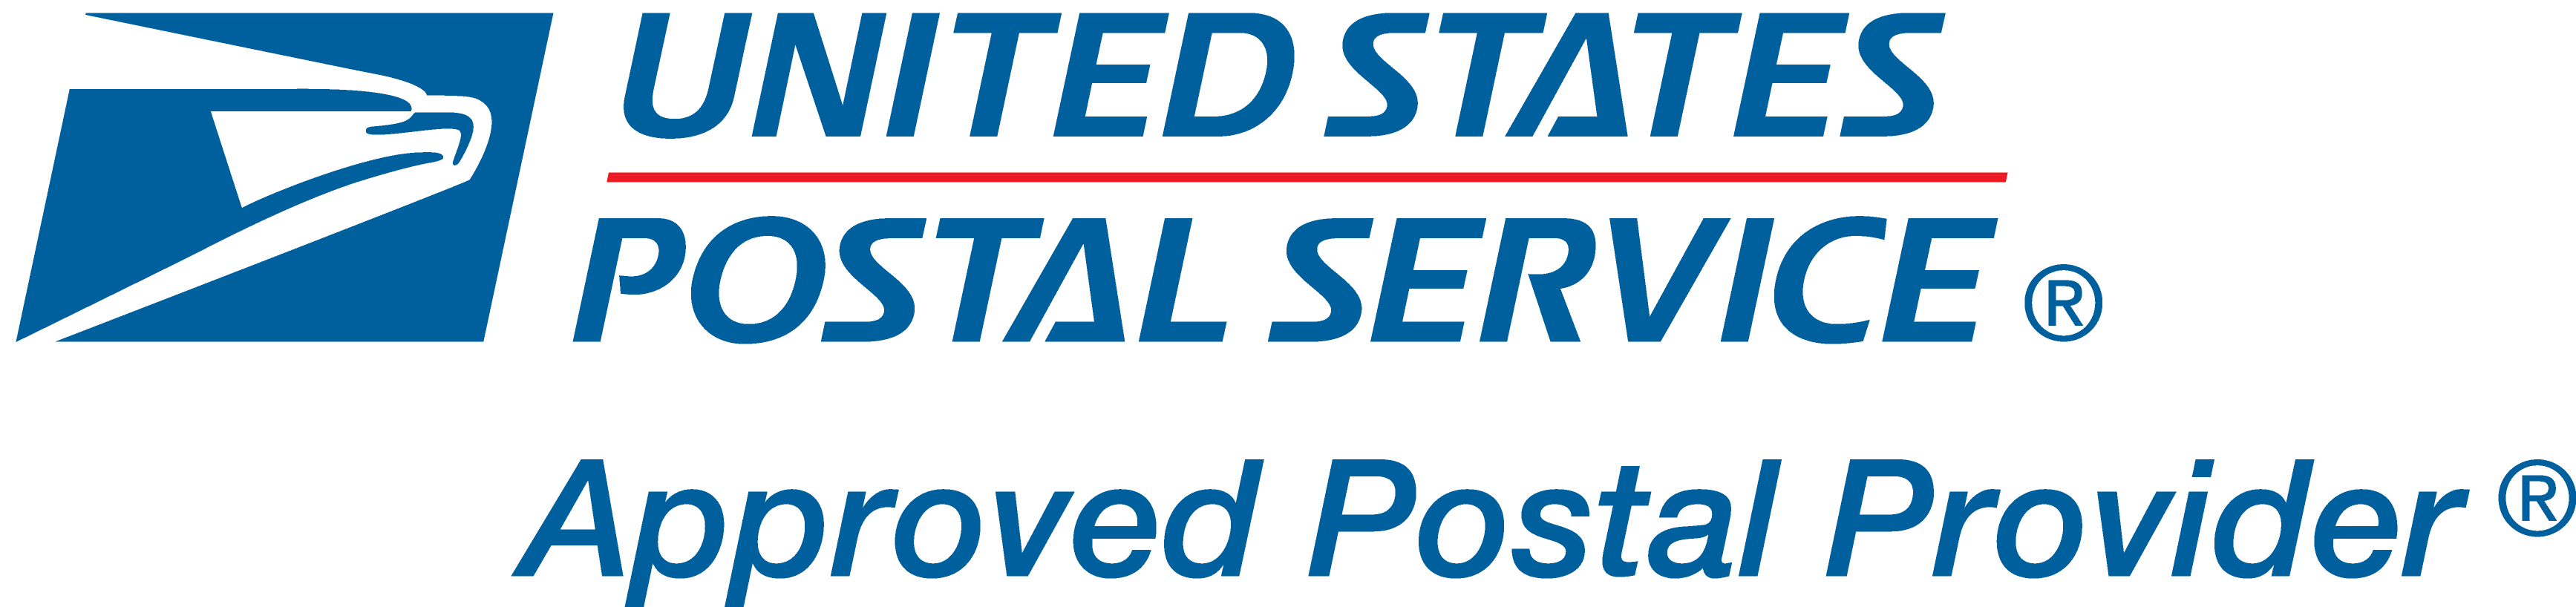 The United States Postal Service, Also Known As The - United States Postal Service (3470x818), Png Download